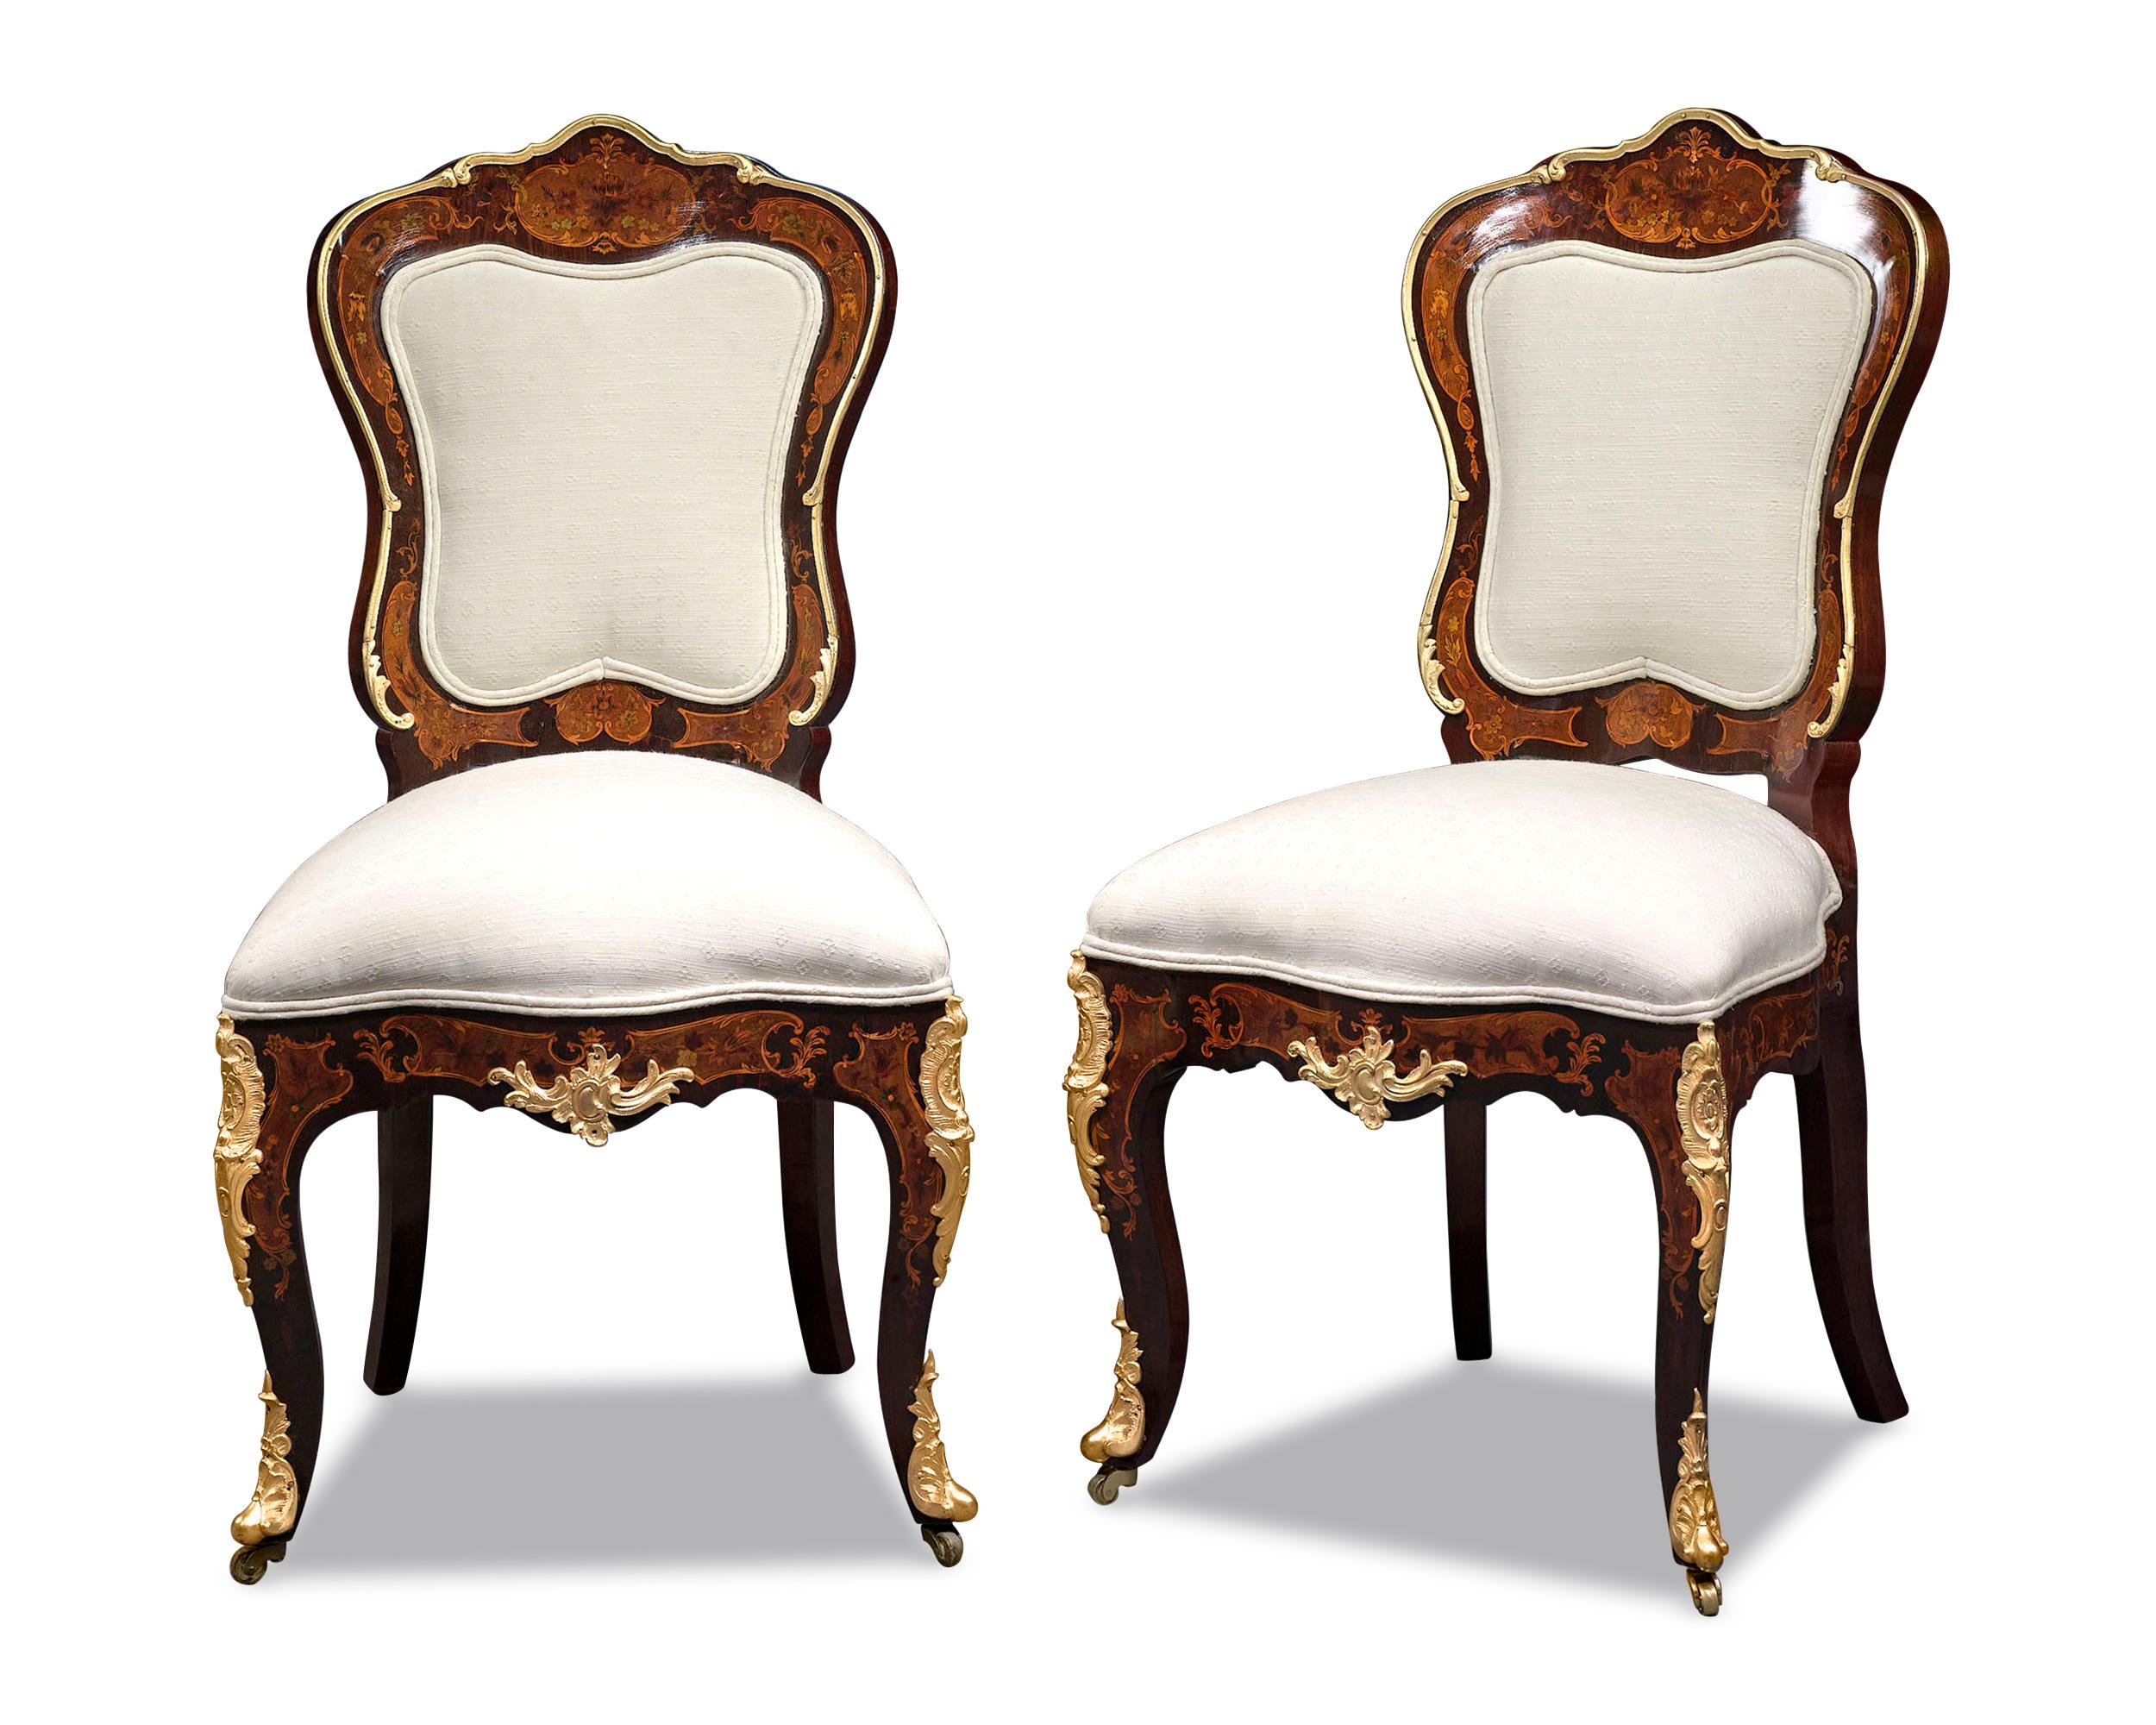 The elegant pair of Louis XV-style side chairs exhibits exceptional artistry. Graceful and feminine lines inform this well-balanced design, from the serpentine backs and seats to the gently curved cabriole legs. This well-balanced design is